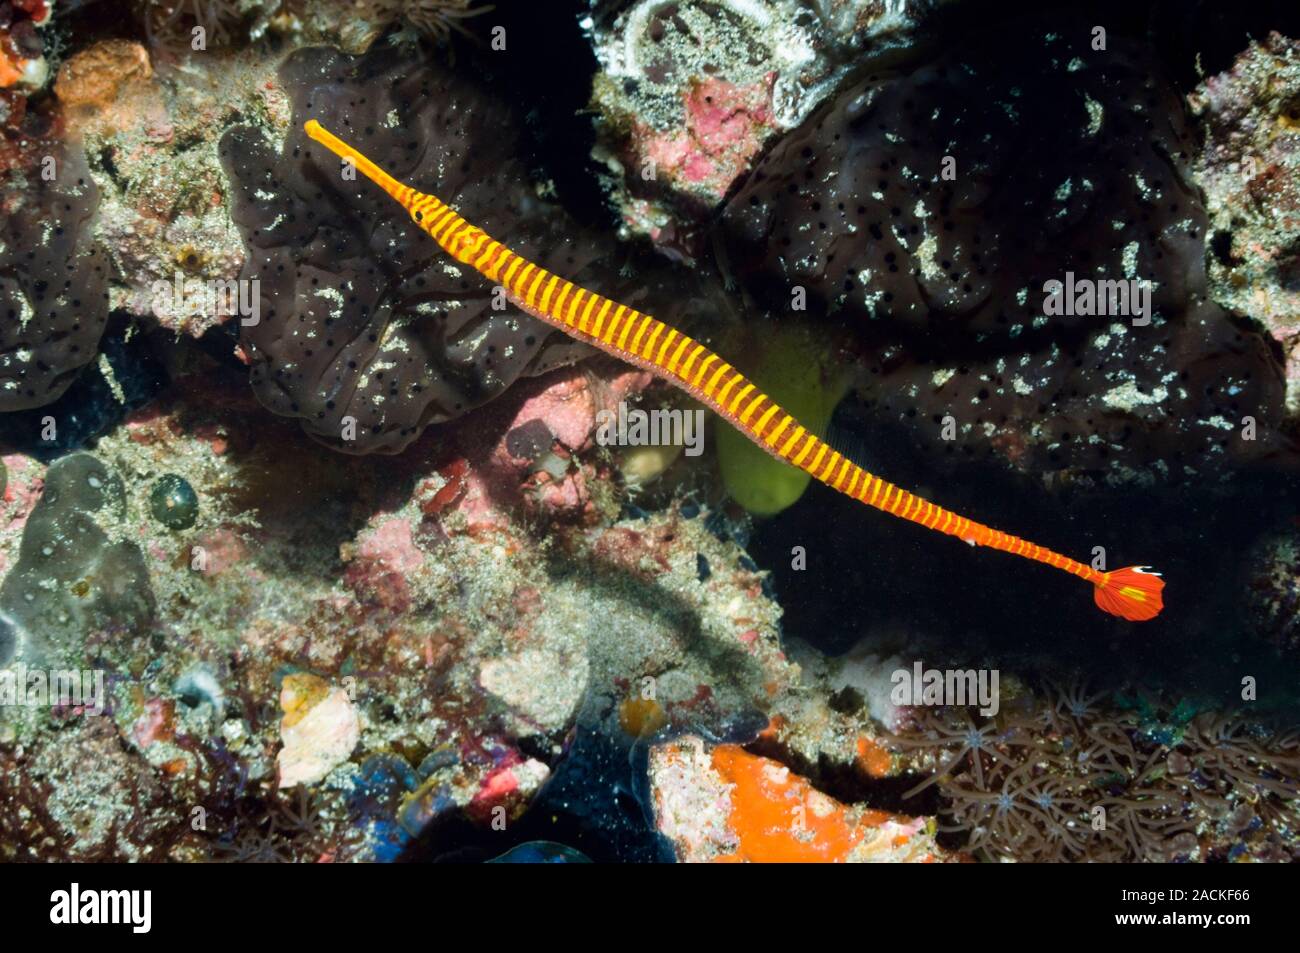 Flagtail pipefish with eggs. Male flagtail pipefish (Dunckerocampus pessuliferus) carrying eggs attached to its underside. Photographed off Rinca Isla Stock Photo